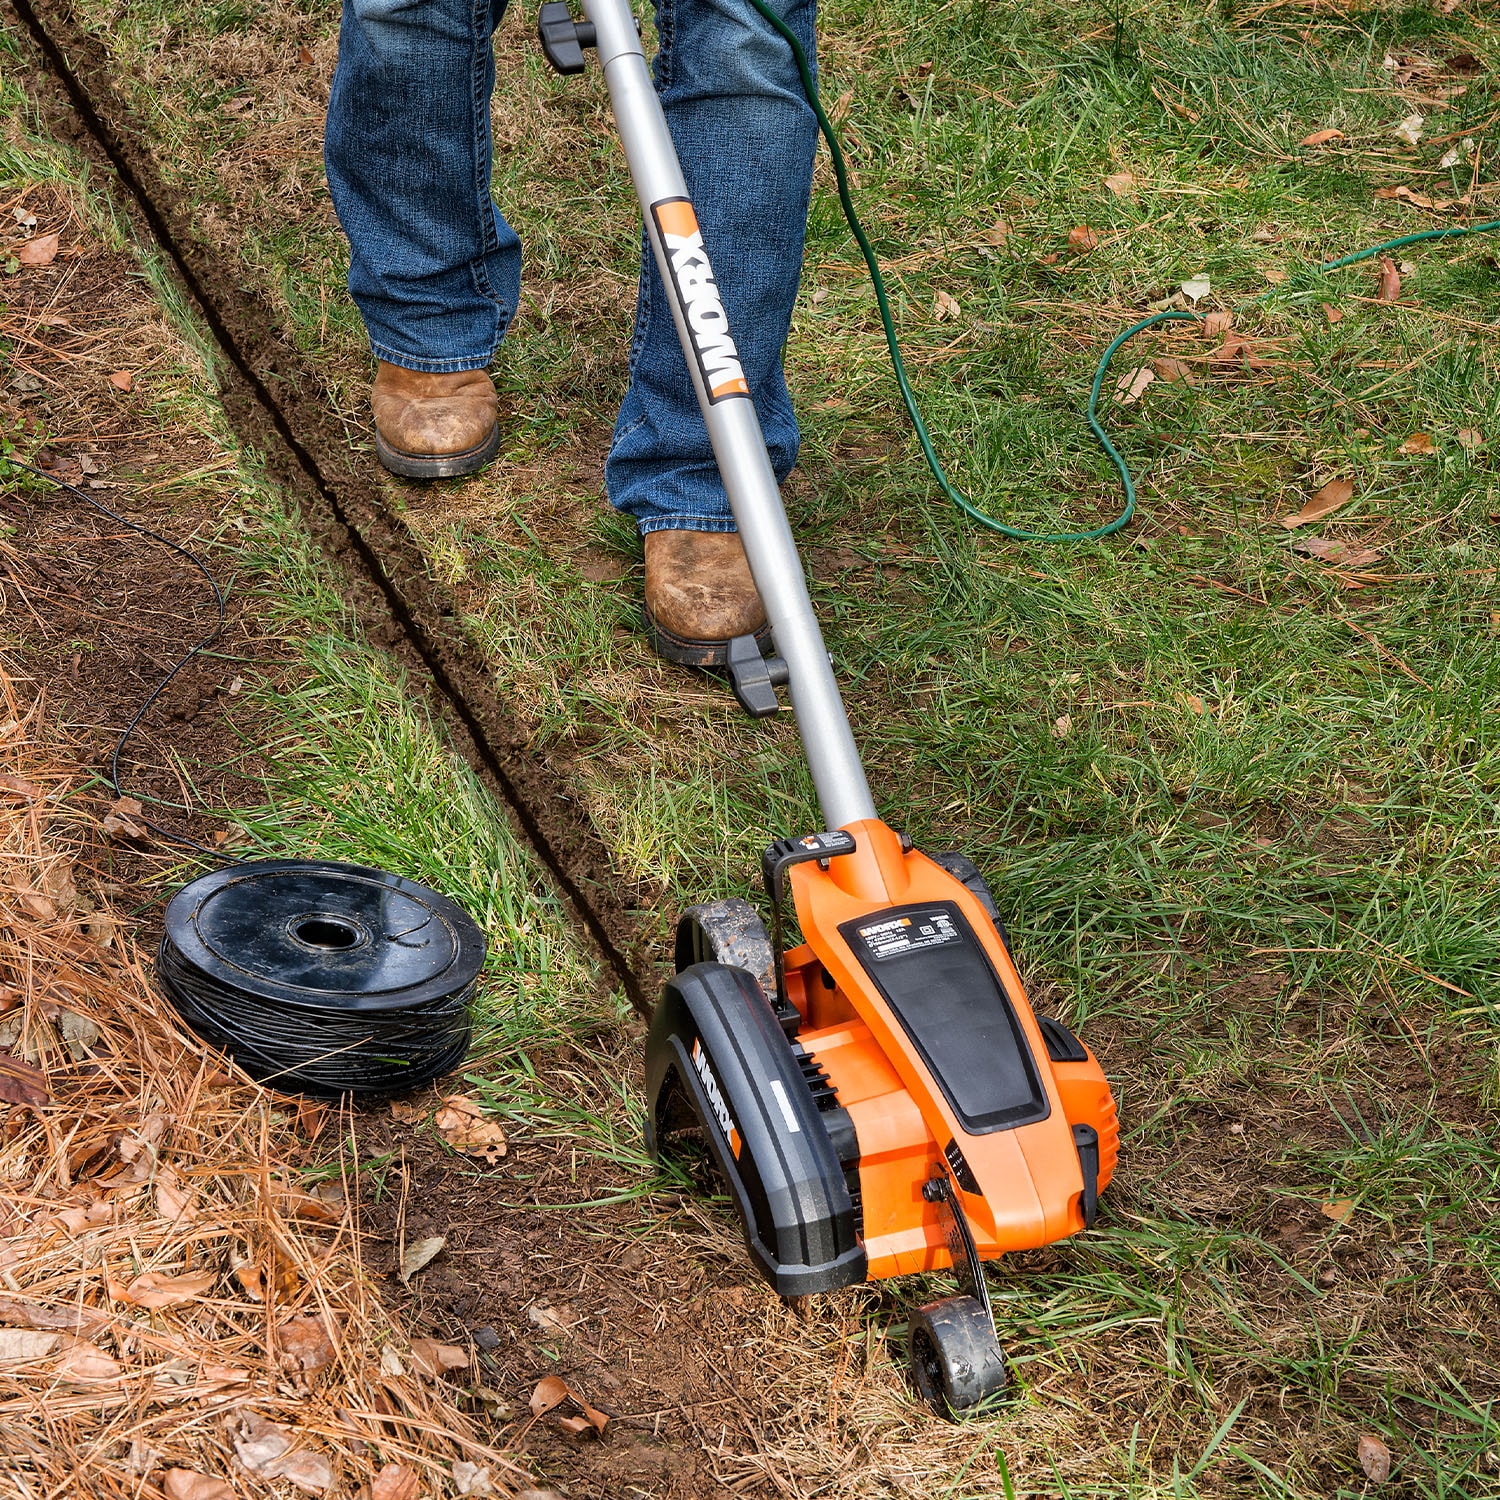 Worx Wg896 12 Amp 7.5 Electric Lawn Edger & Trencher : Target